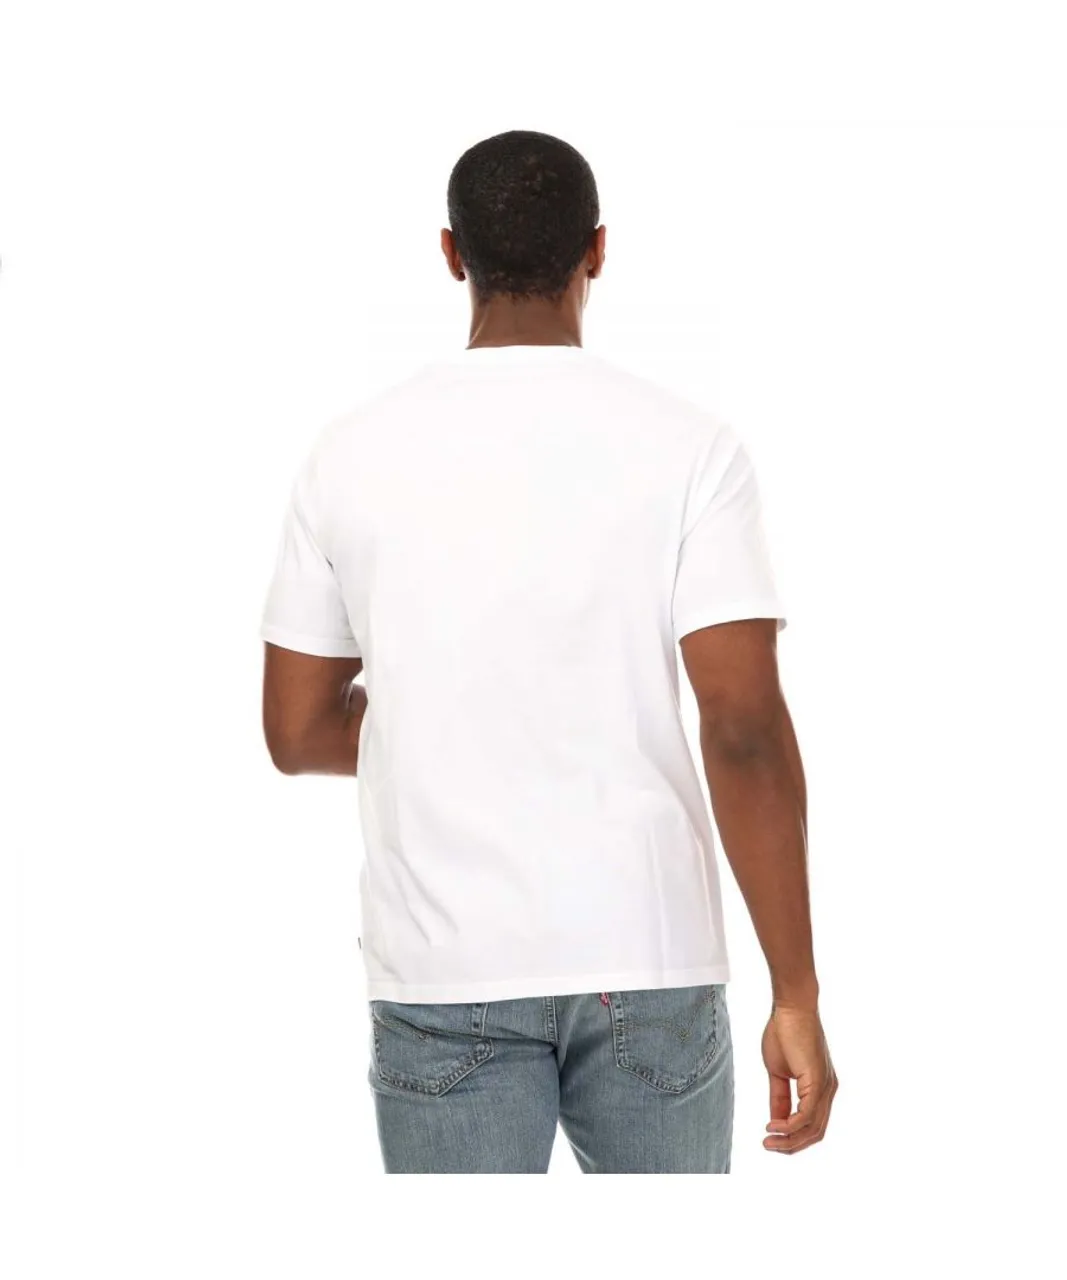 Levi's Mens Levis Relaxed Fit T-Shirt in White Cotton